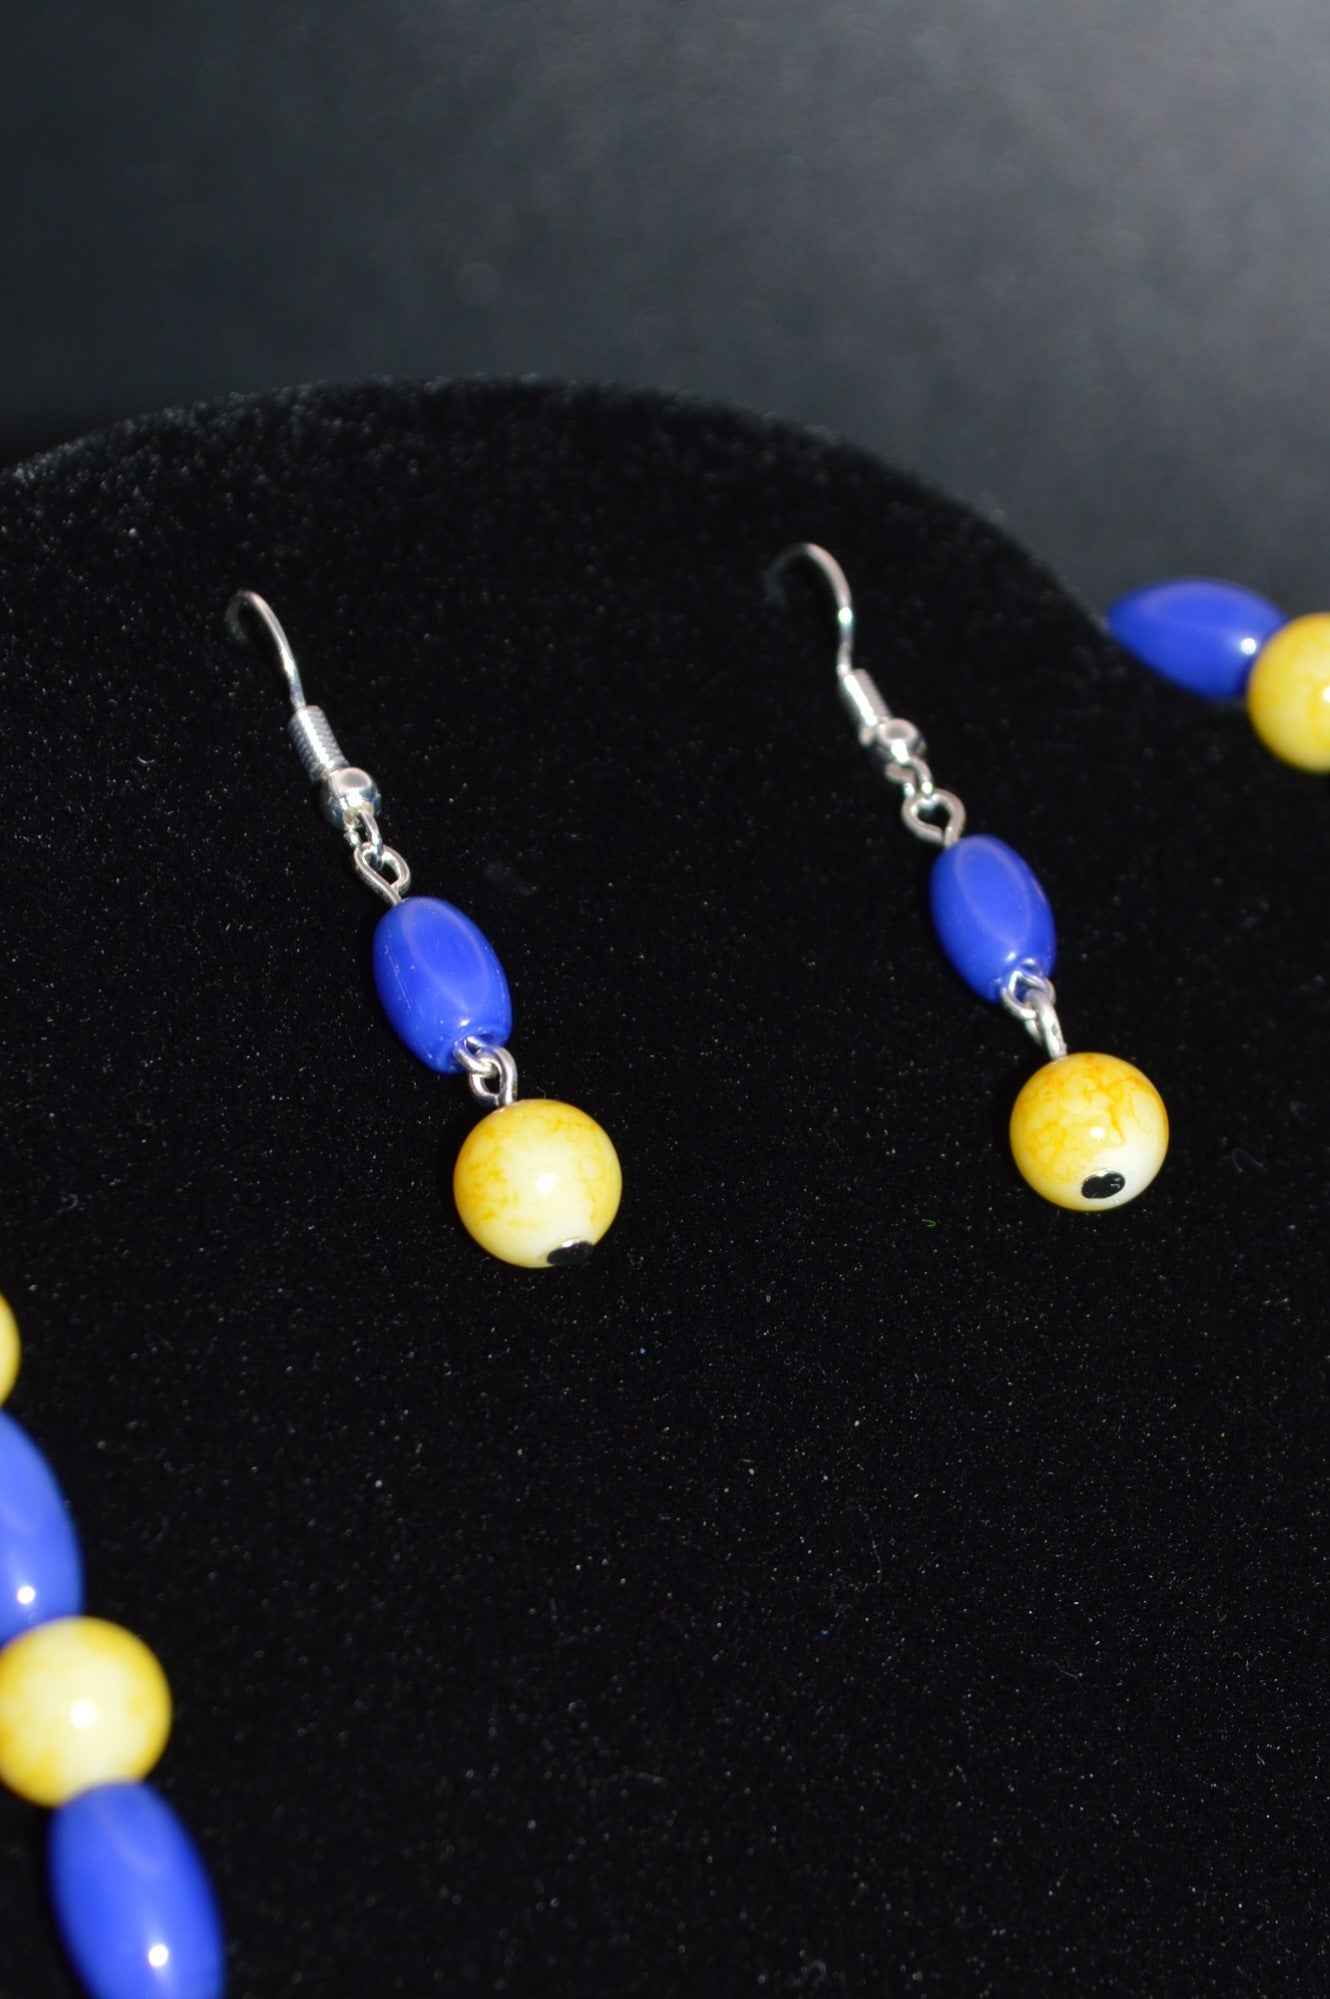 Yellow Marbled Glass and Blue Cat's eye Glass Necklace and Earring Set